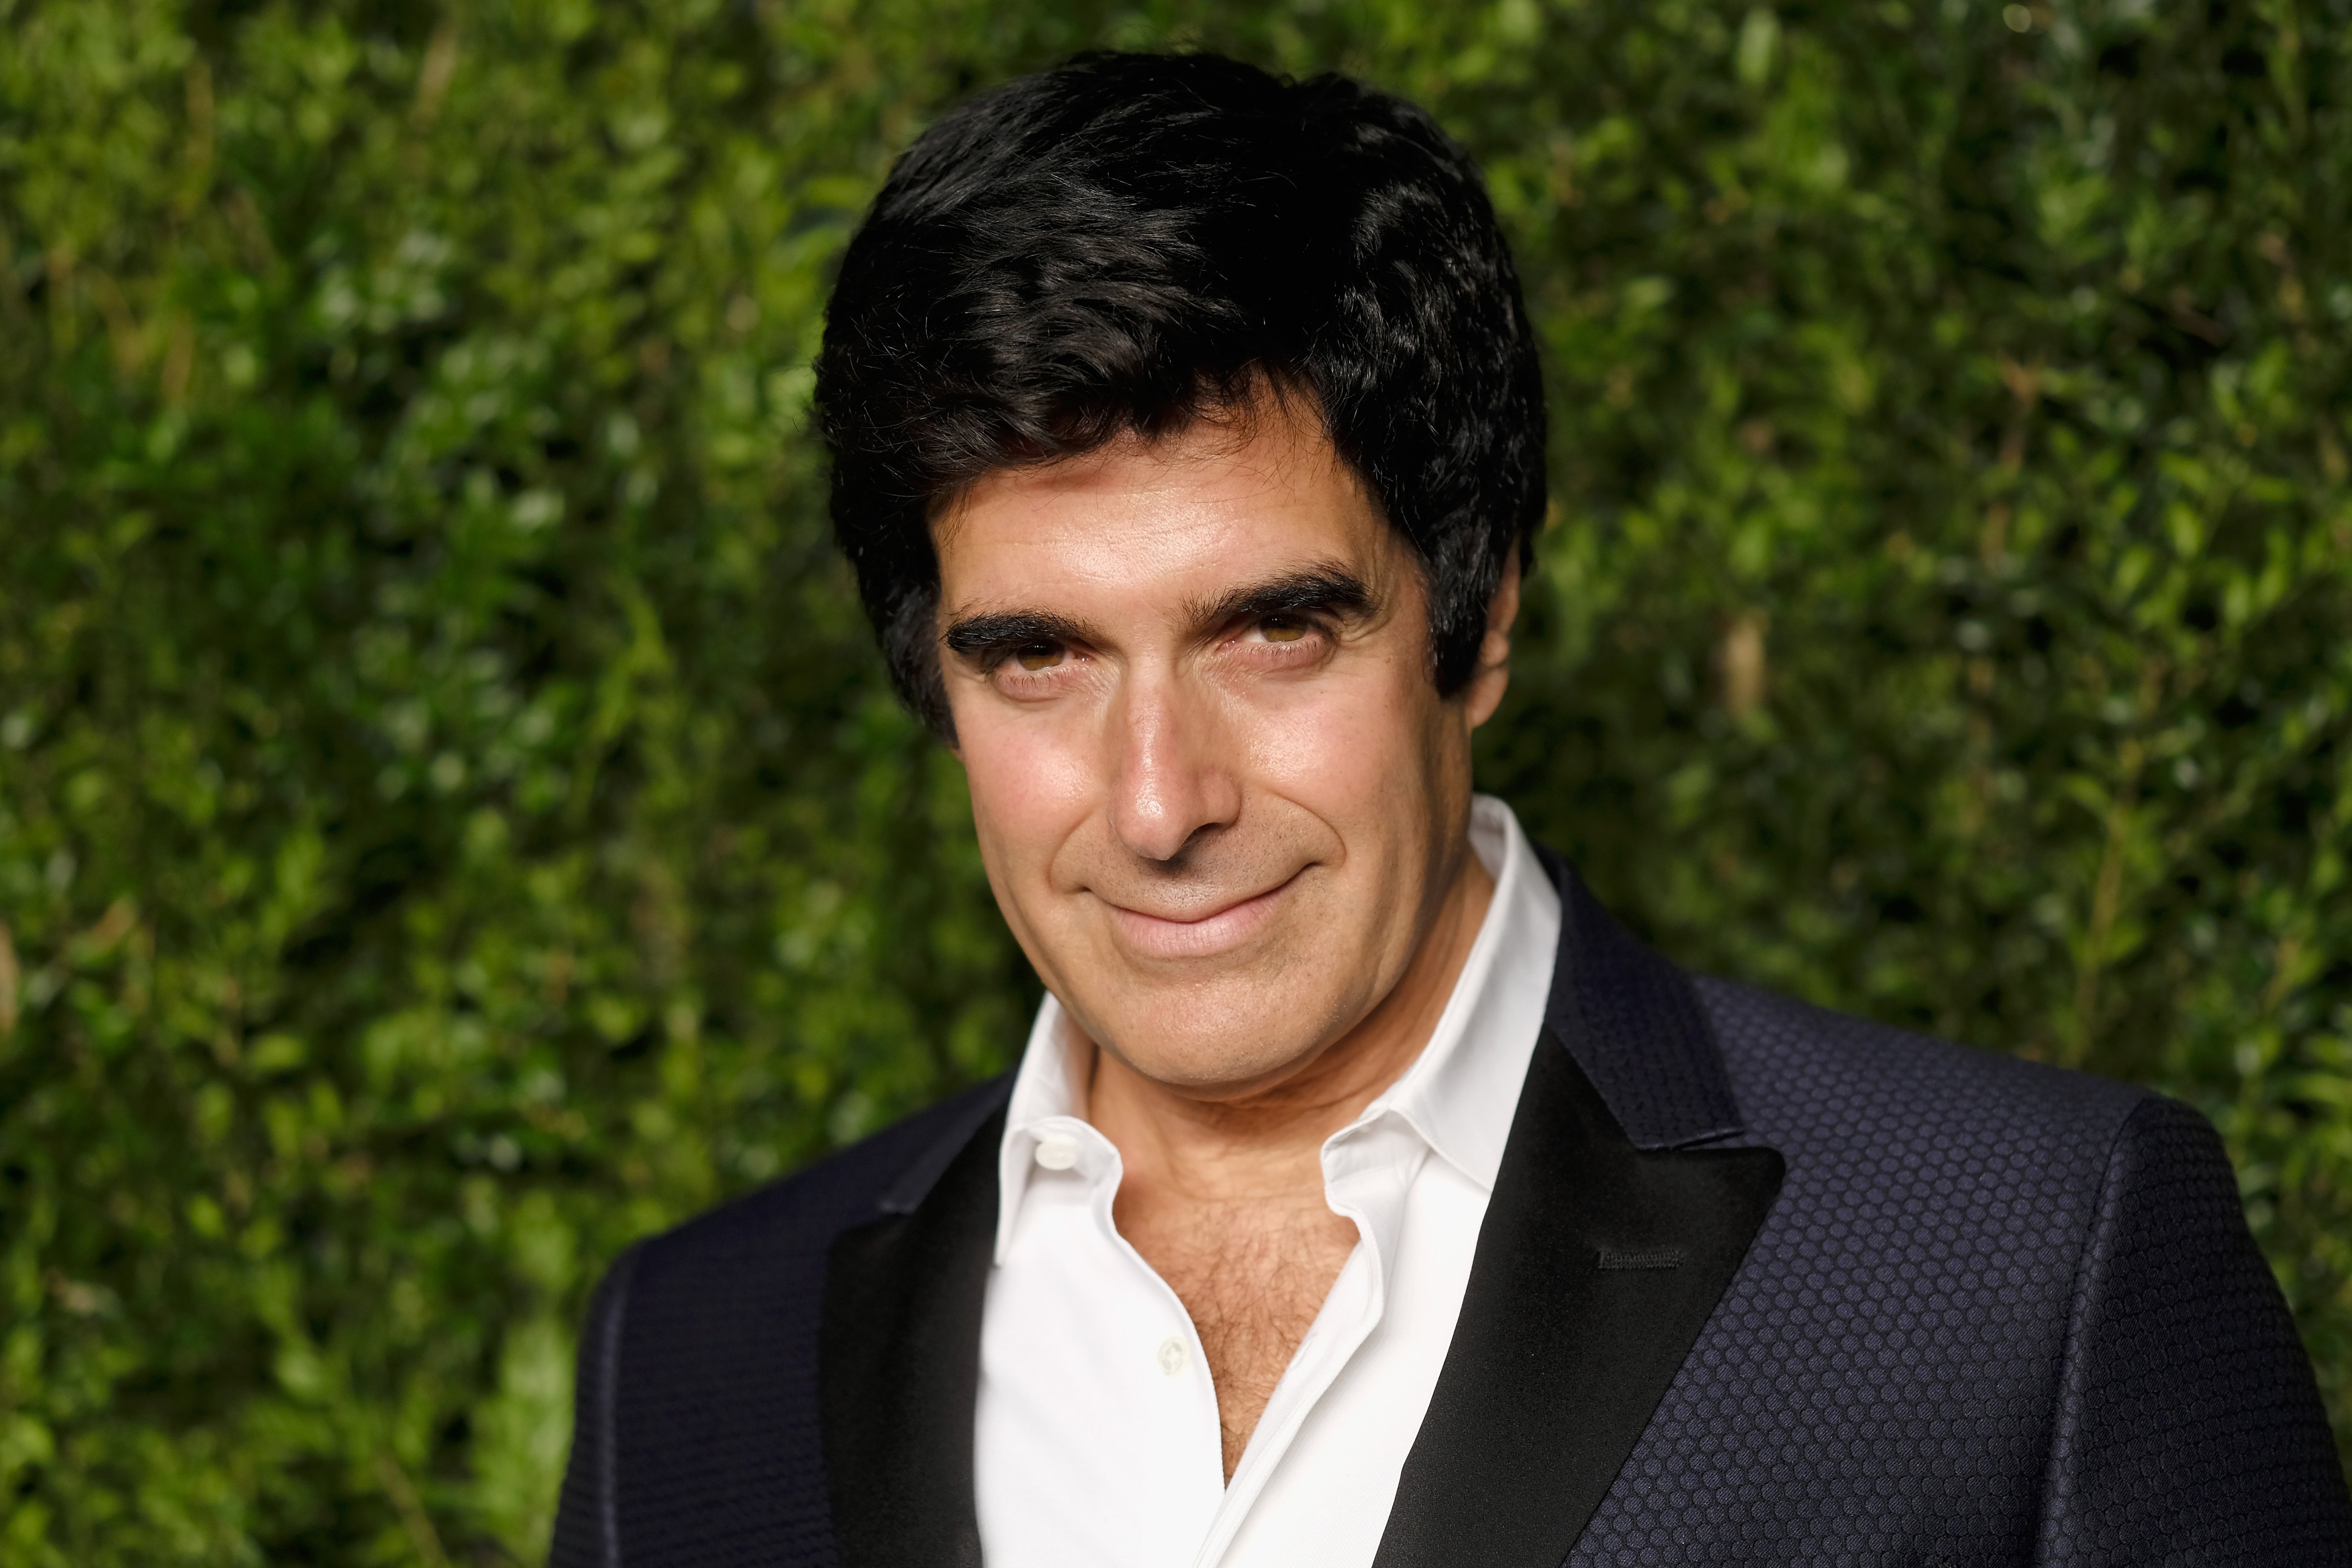 Illusionist David Copperfield attends 13th Annual CFDA/Vogue Fashion Fund Awards at Spring Studios on November 7, 2016 in New York City. (Dimitrios Kambouris&mdash;Getty Images)